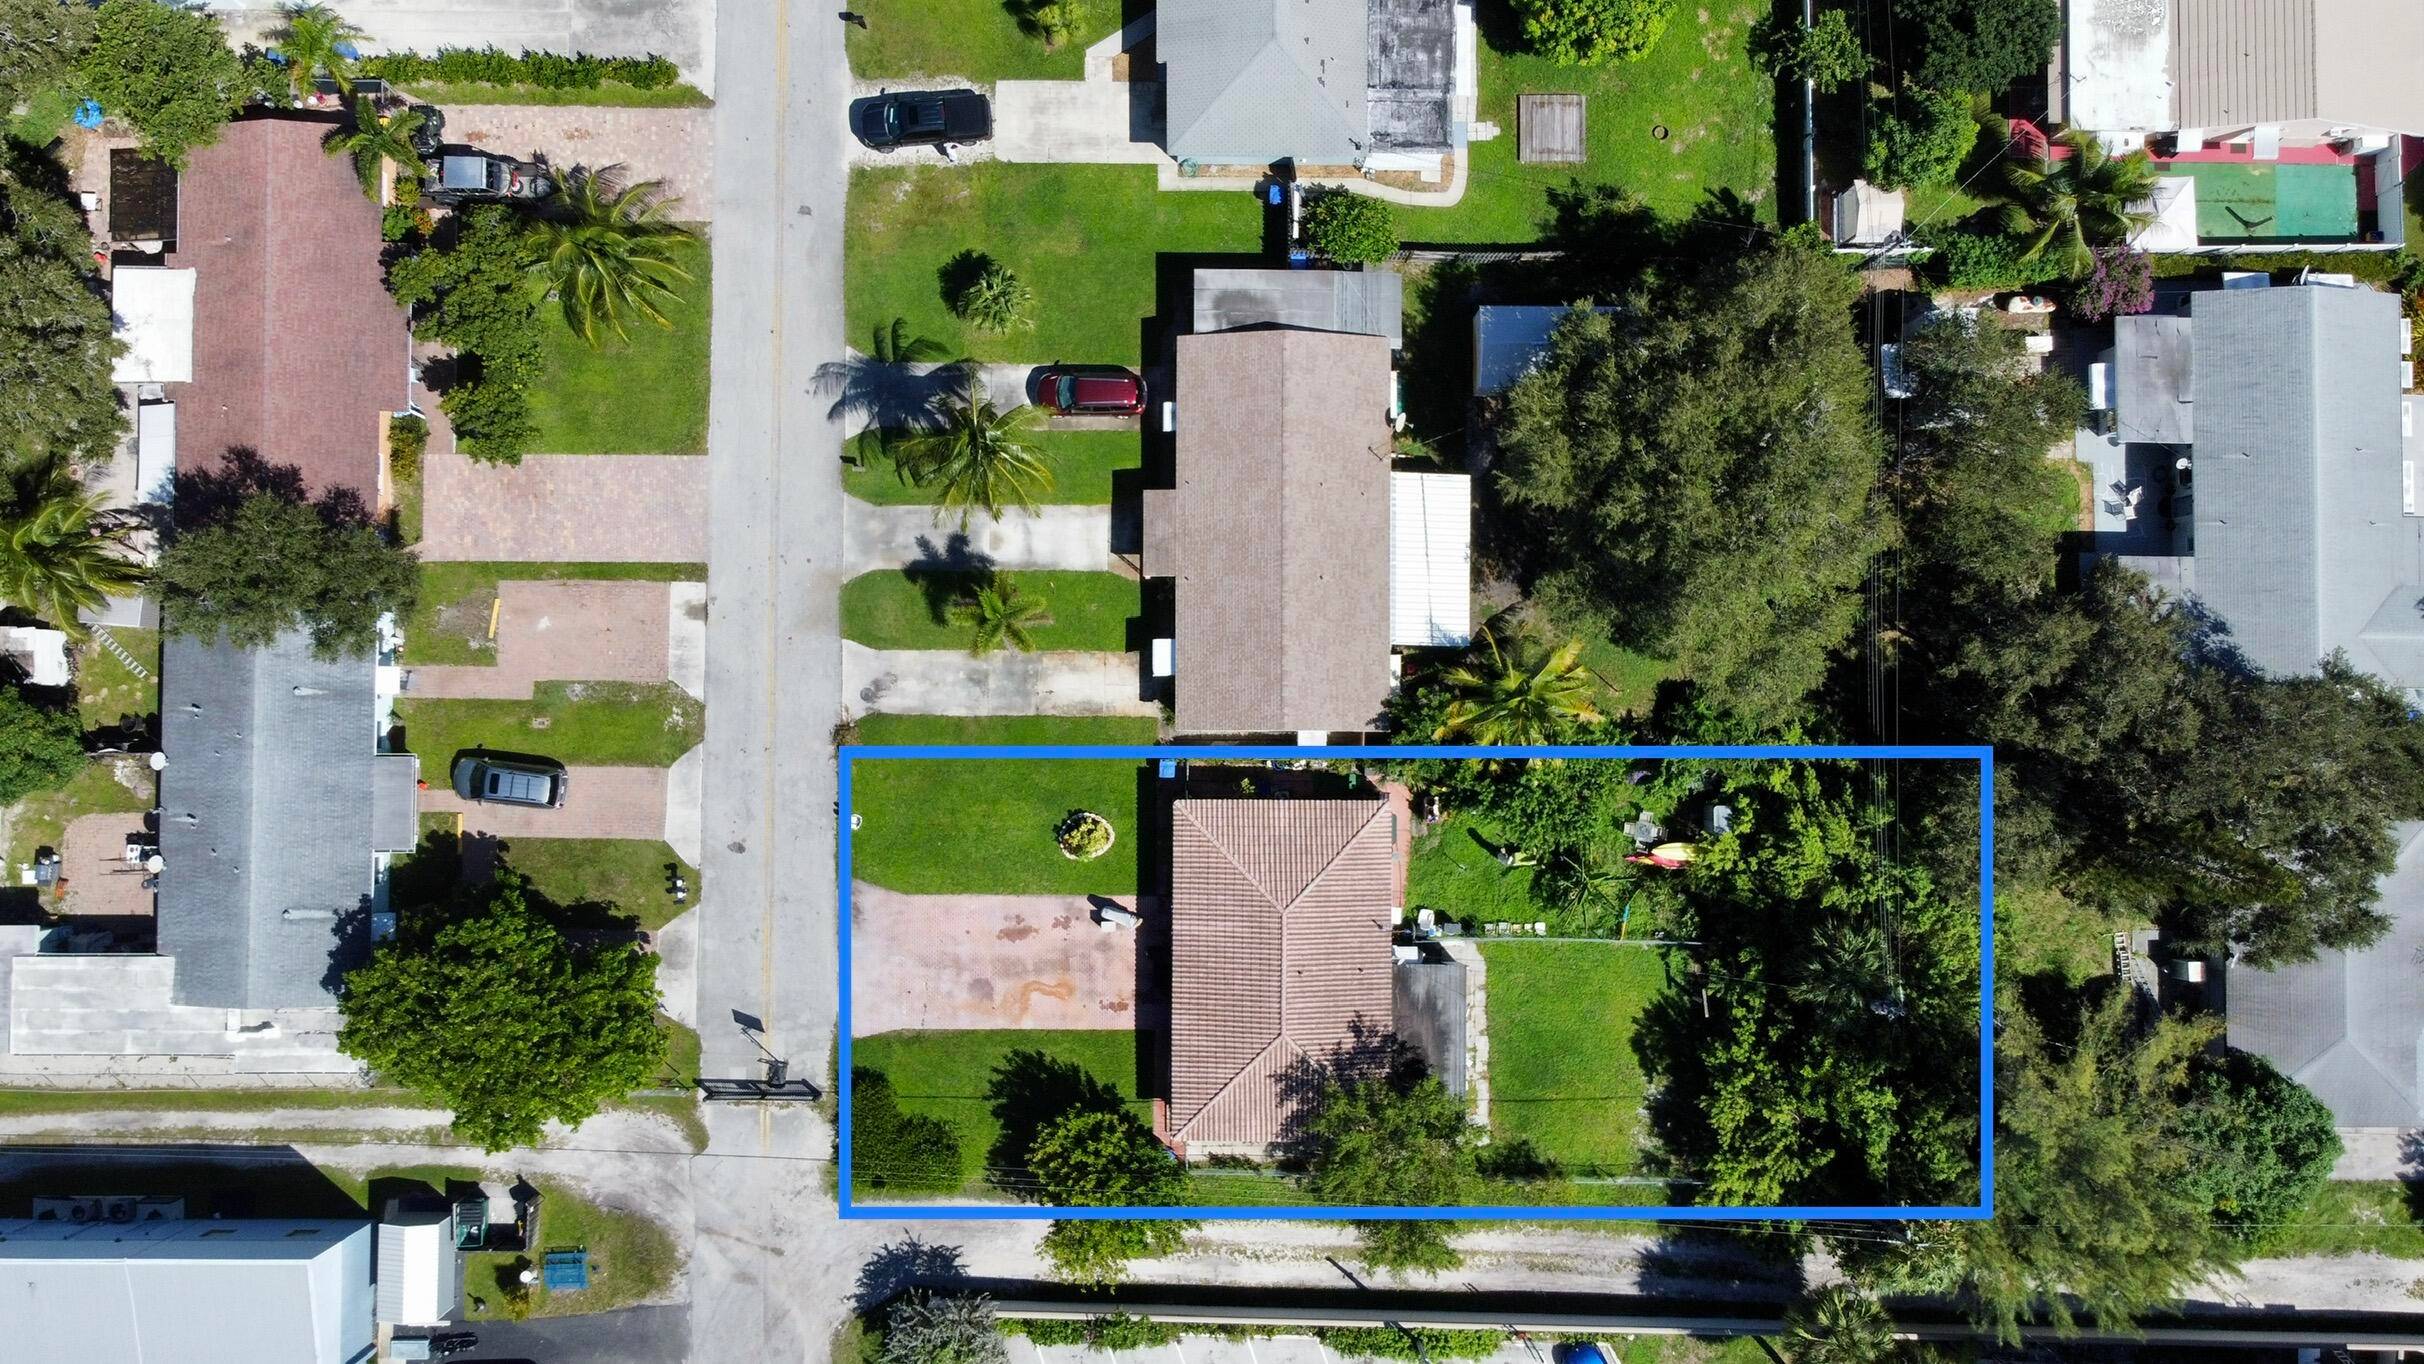 DUPLEX in Nice East area of Lantana Beach, with split yard great location to live on one side and rent the other or full income property.